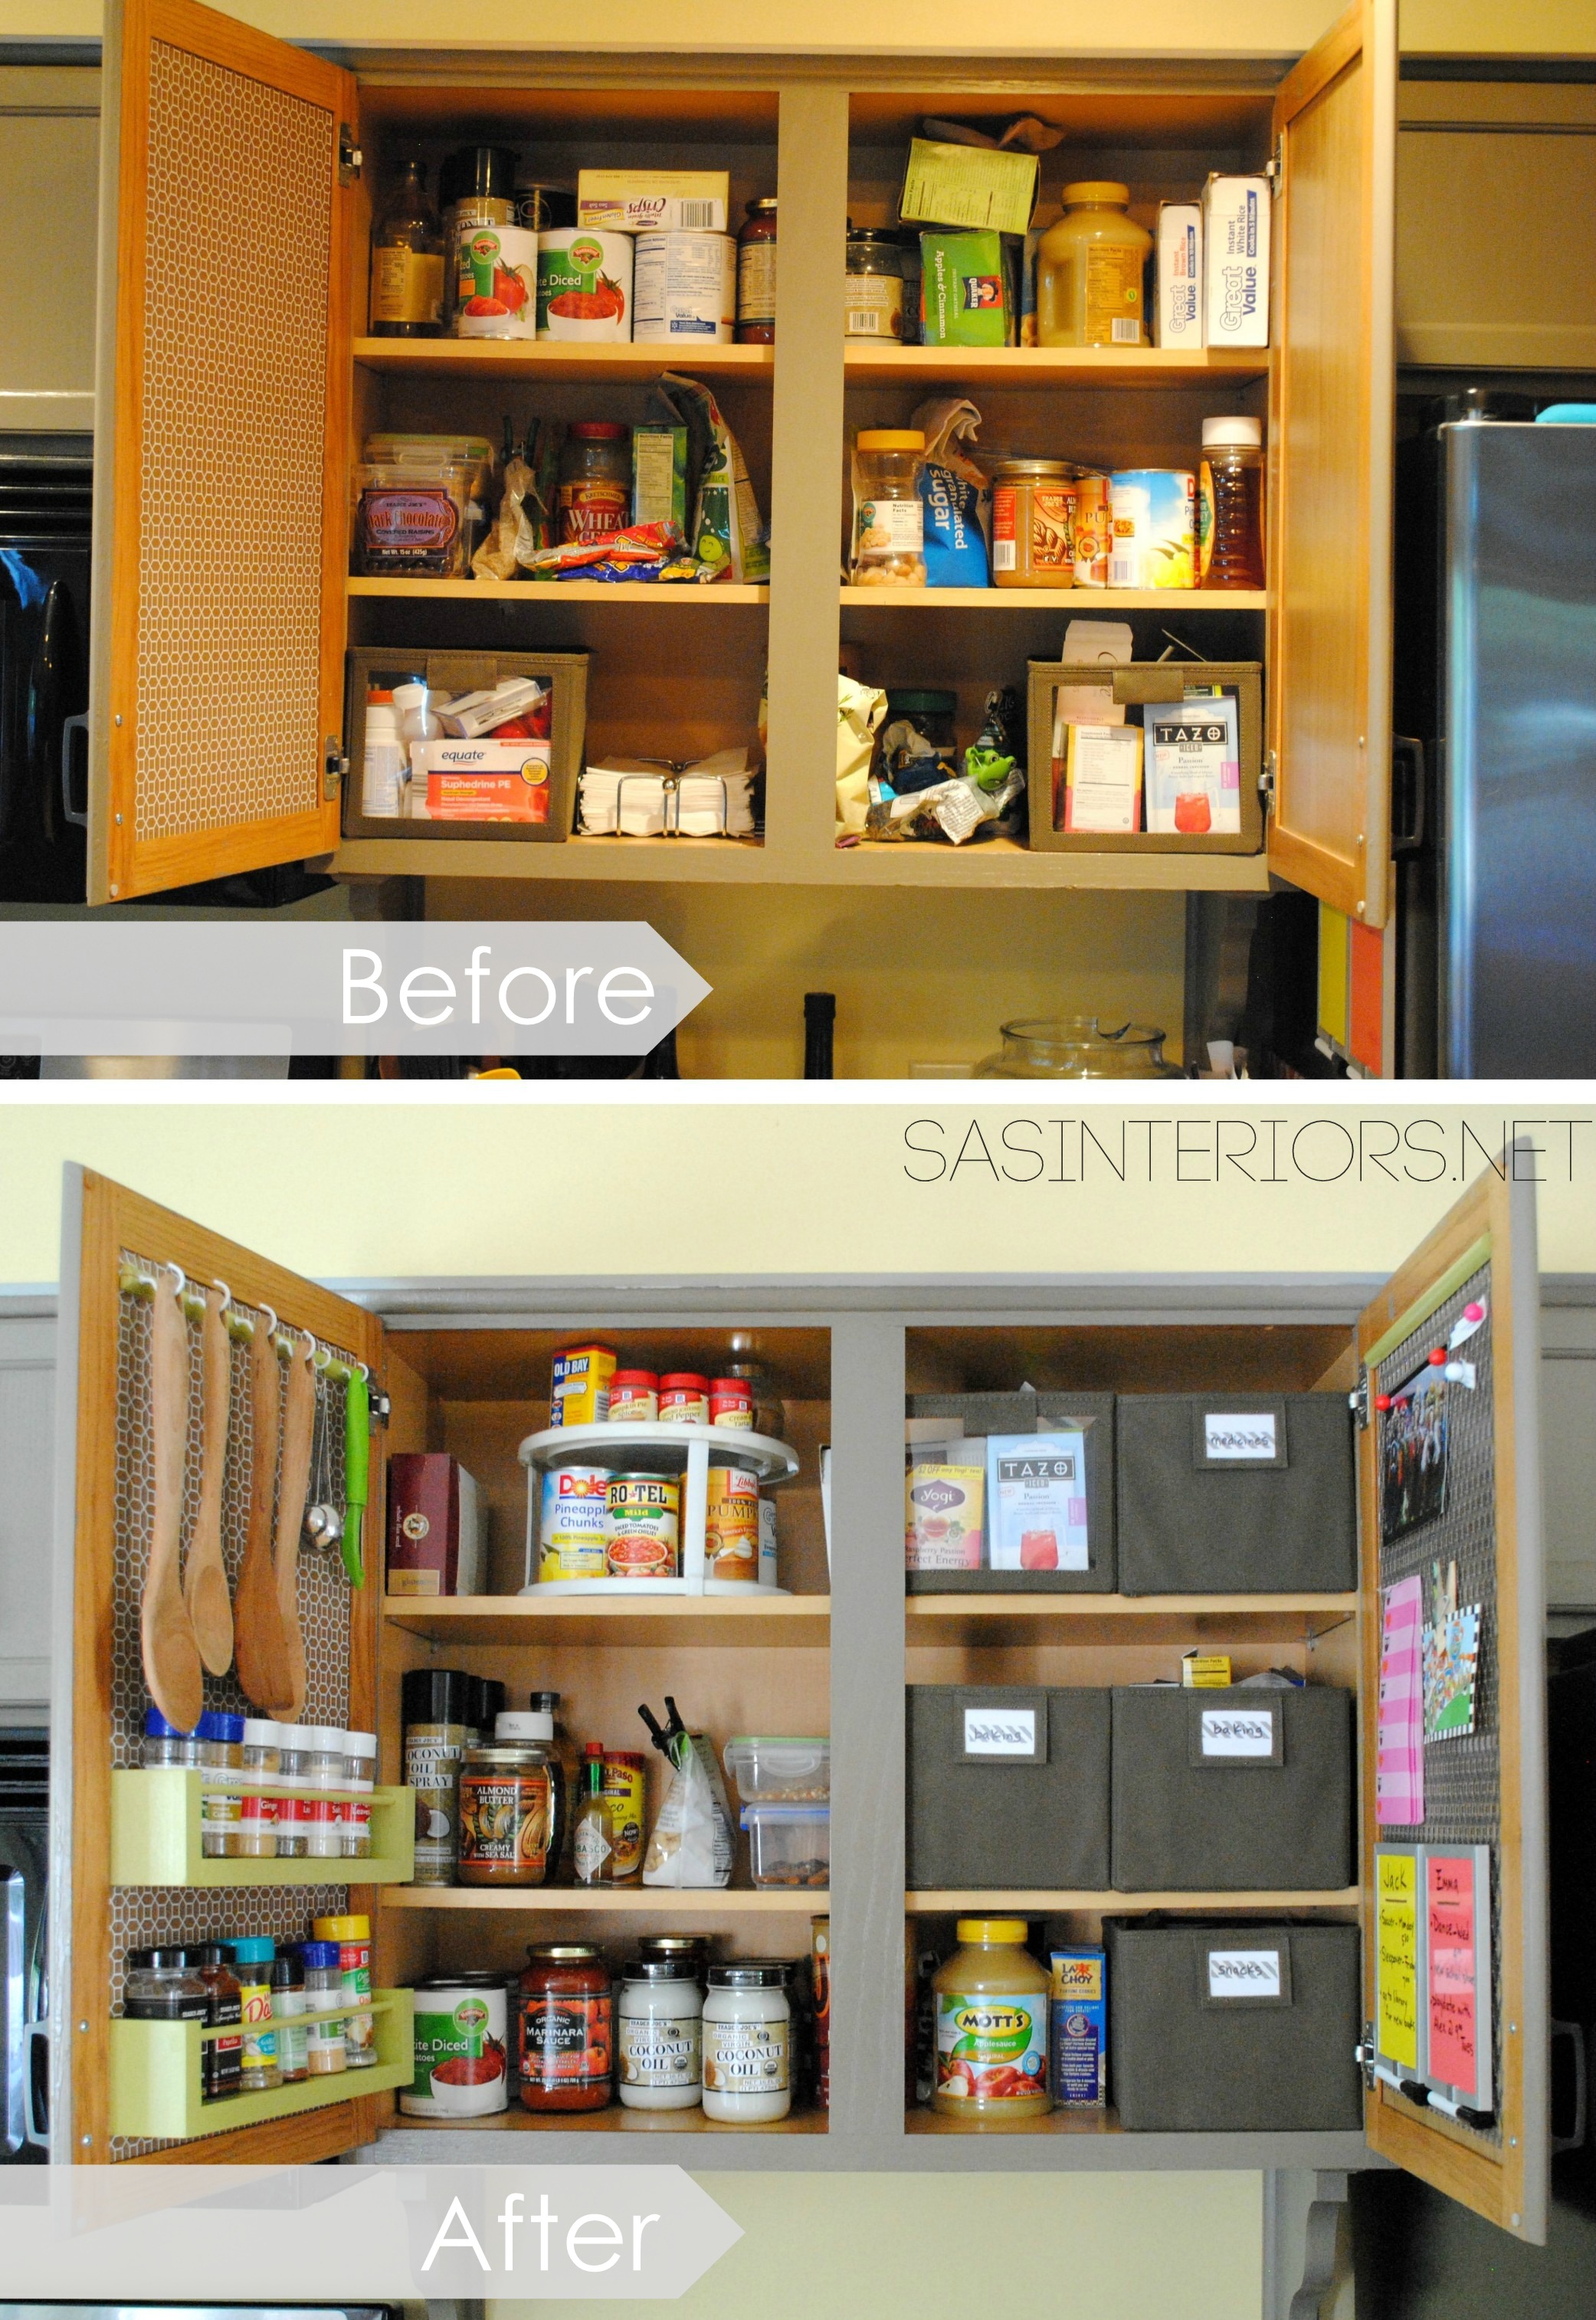 Kitchen Organization: Ideas for the Inside of the Cabinet Doors